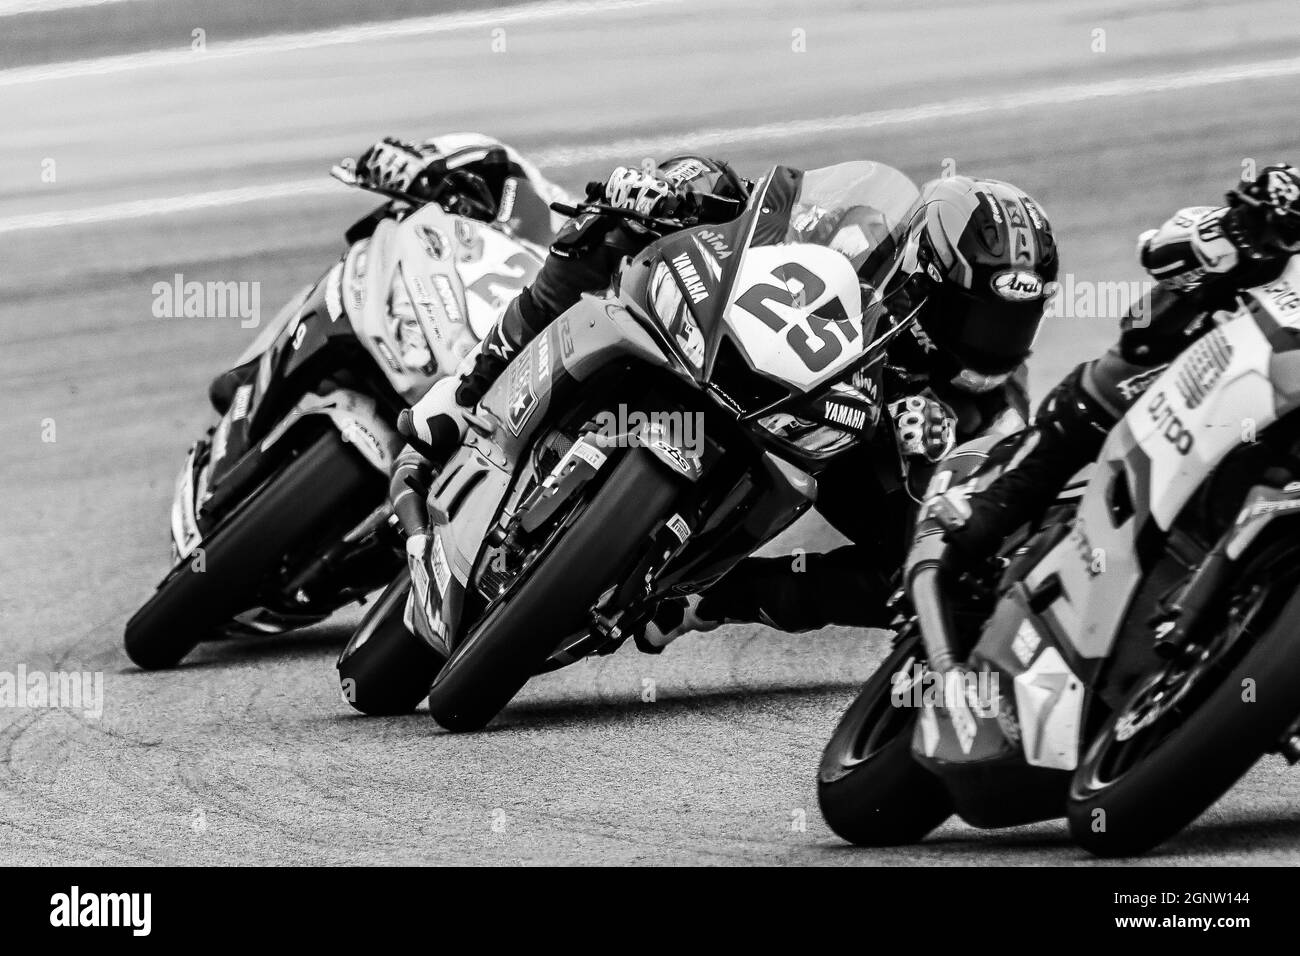 SuperSport300-WSBK 2021 1st race rider  # 25 Dean Berta Vinales pass away in a accident Stock Photo